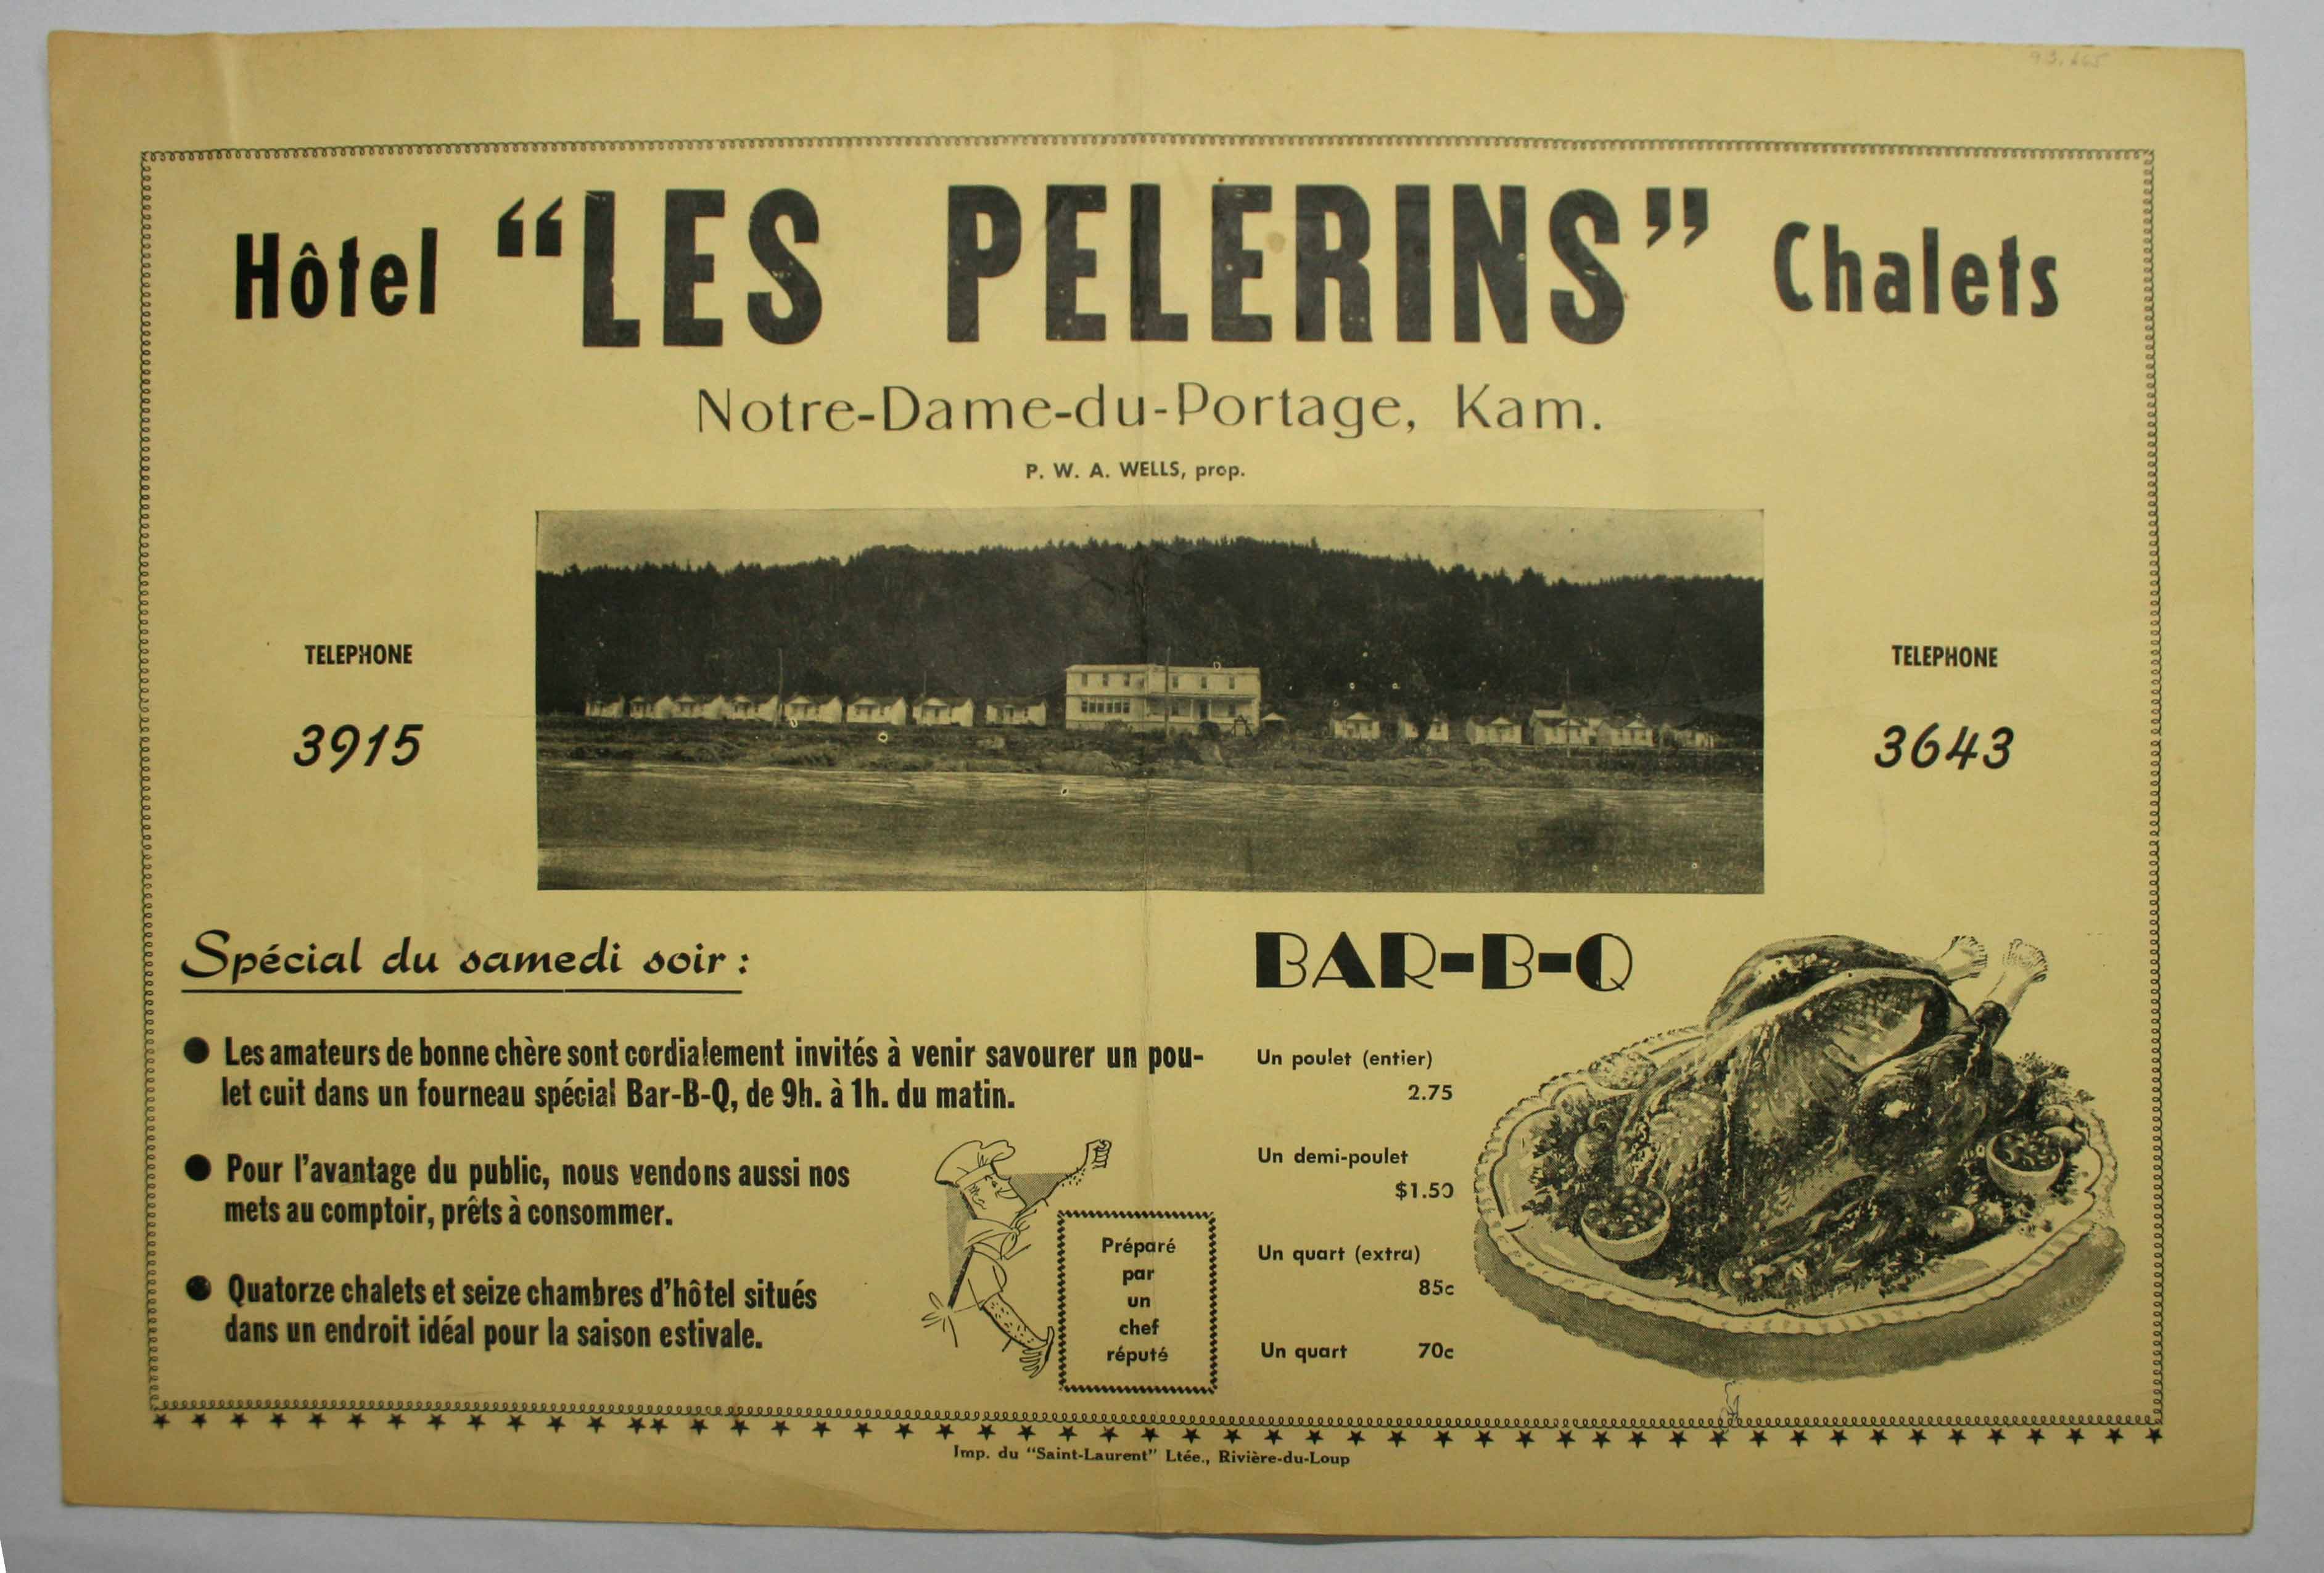 Printed on a placemat, this ad praises of the meals, rooms and cabins at Hôtel Les Pèlerins.